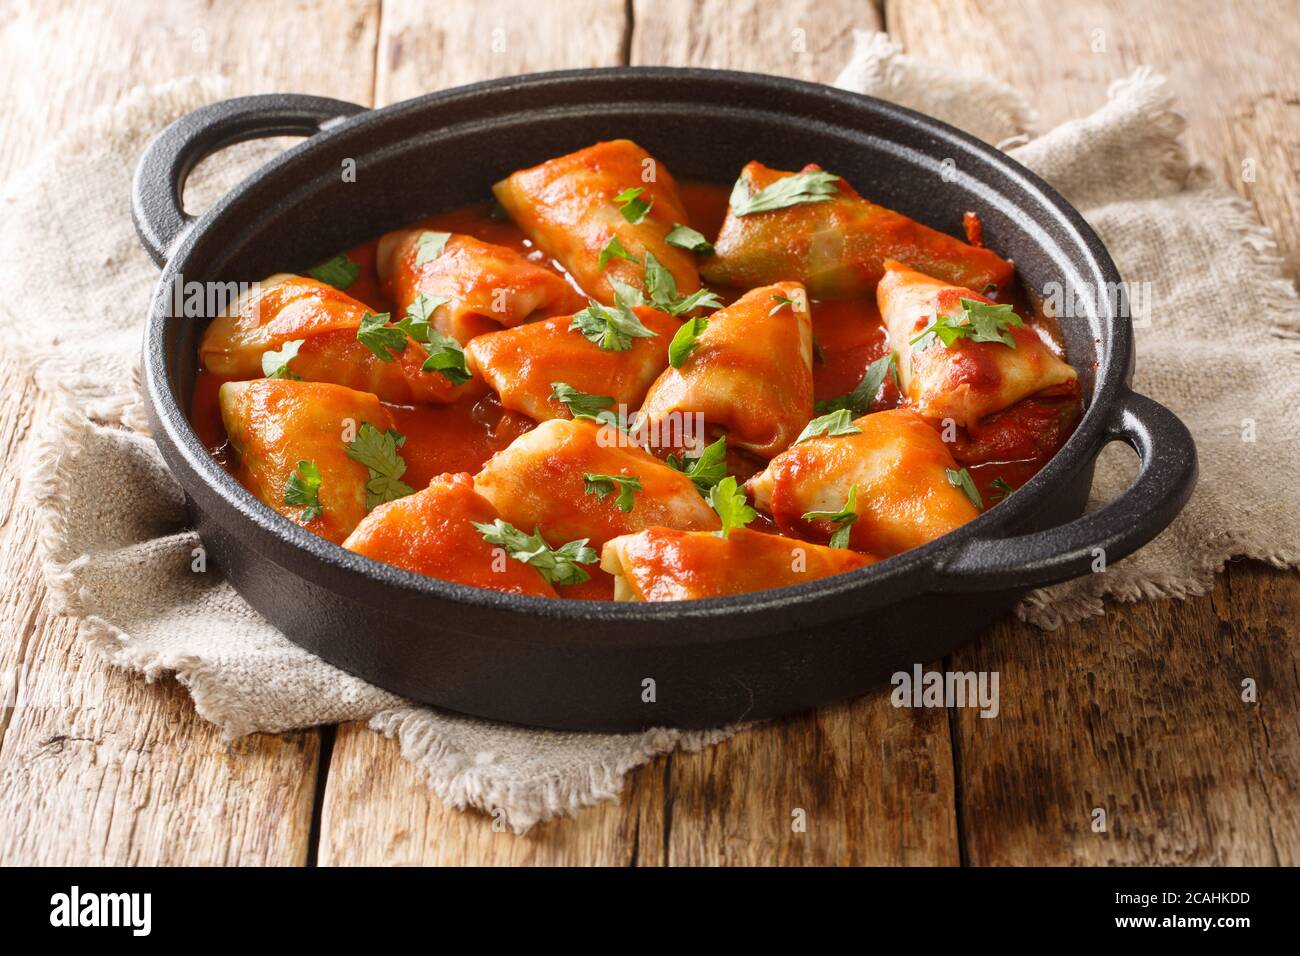 Traditional stuffed cabbage with minced meat and rice, served in a tomato sauce close-up in a bowl on the table. Horizontal Stock Photo